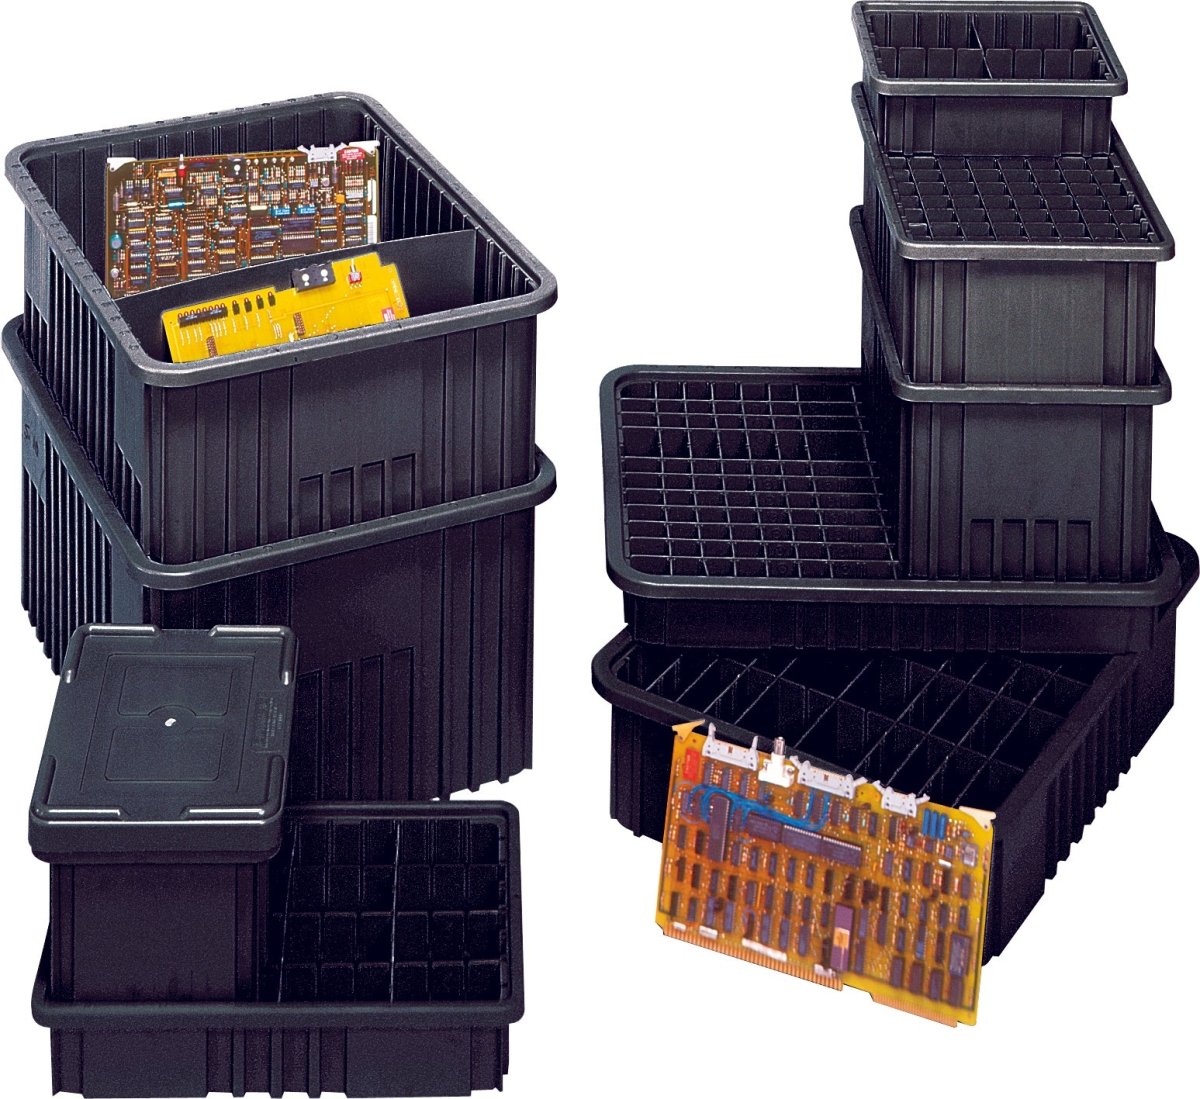 The Importance of ESD Bins in Electronic Manufacturing - Industrial 4 Less